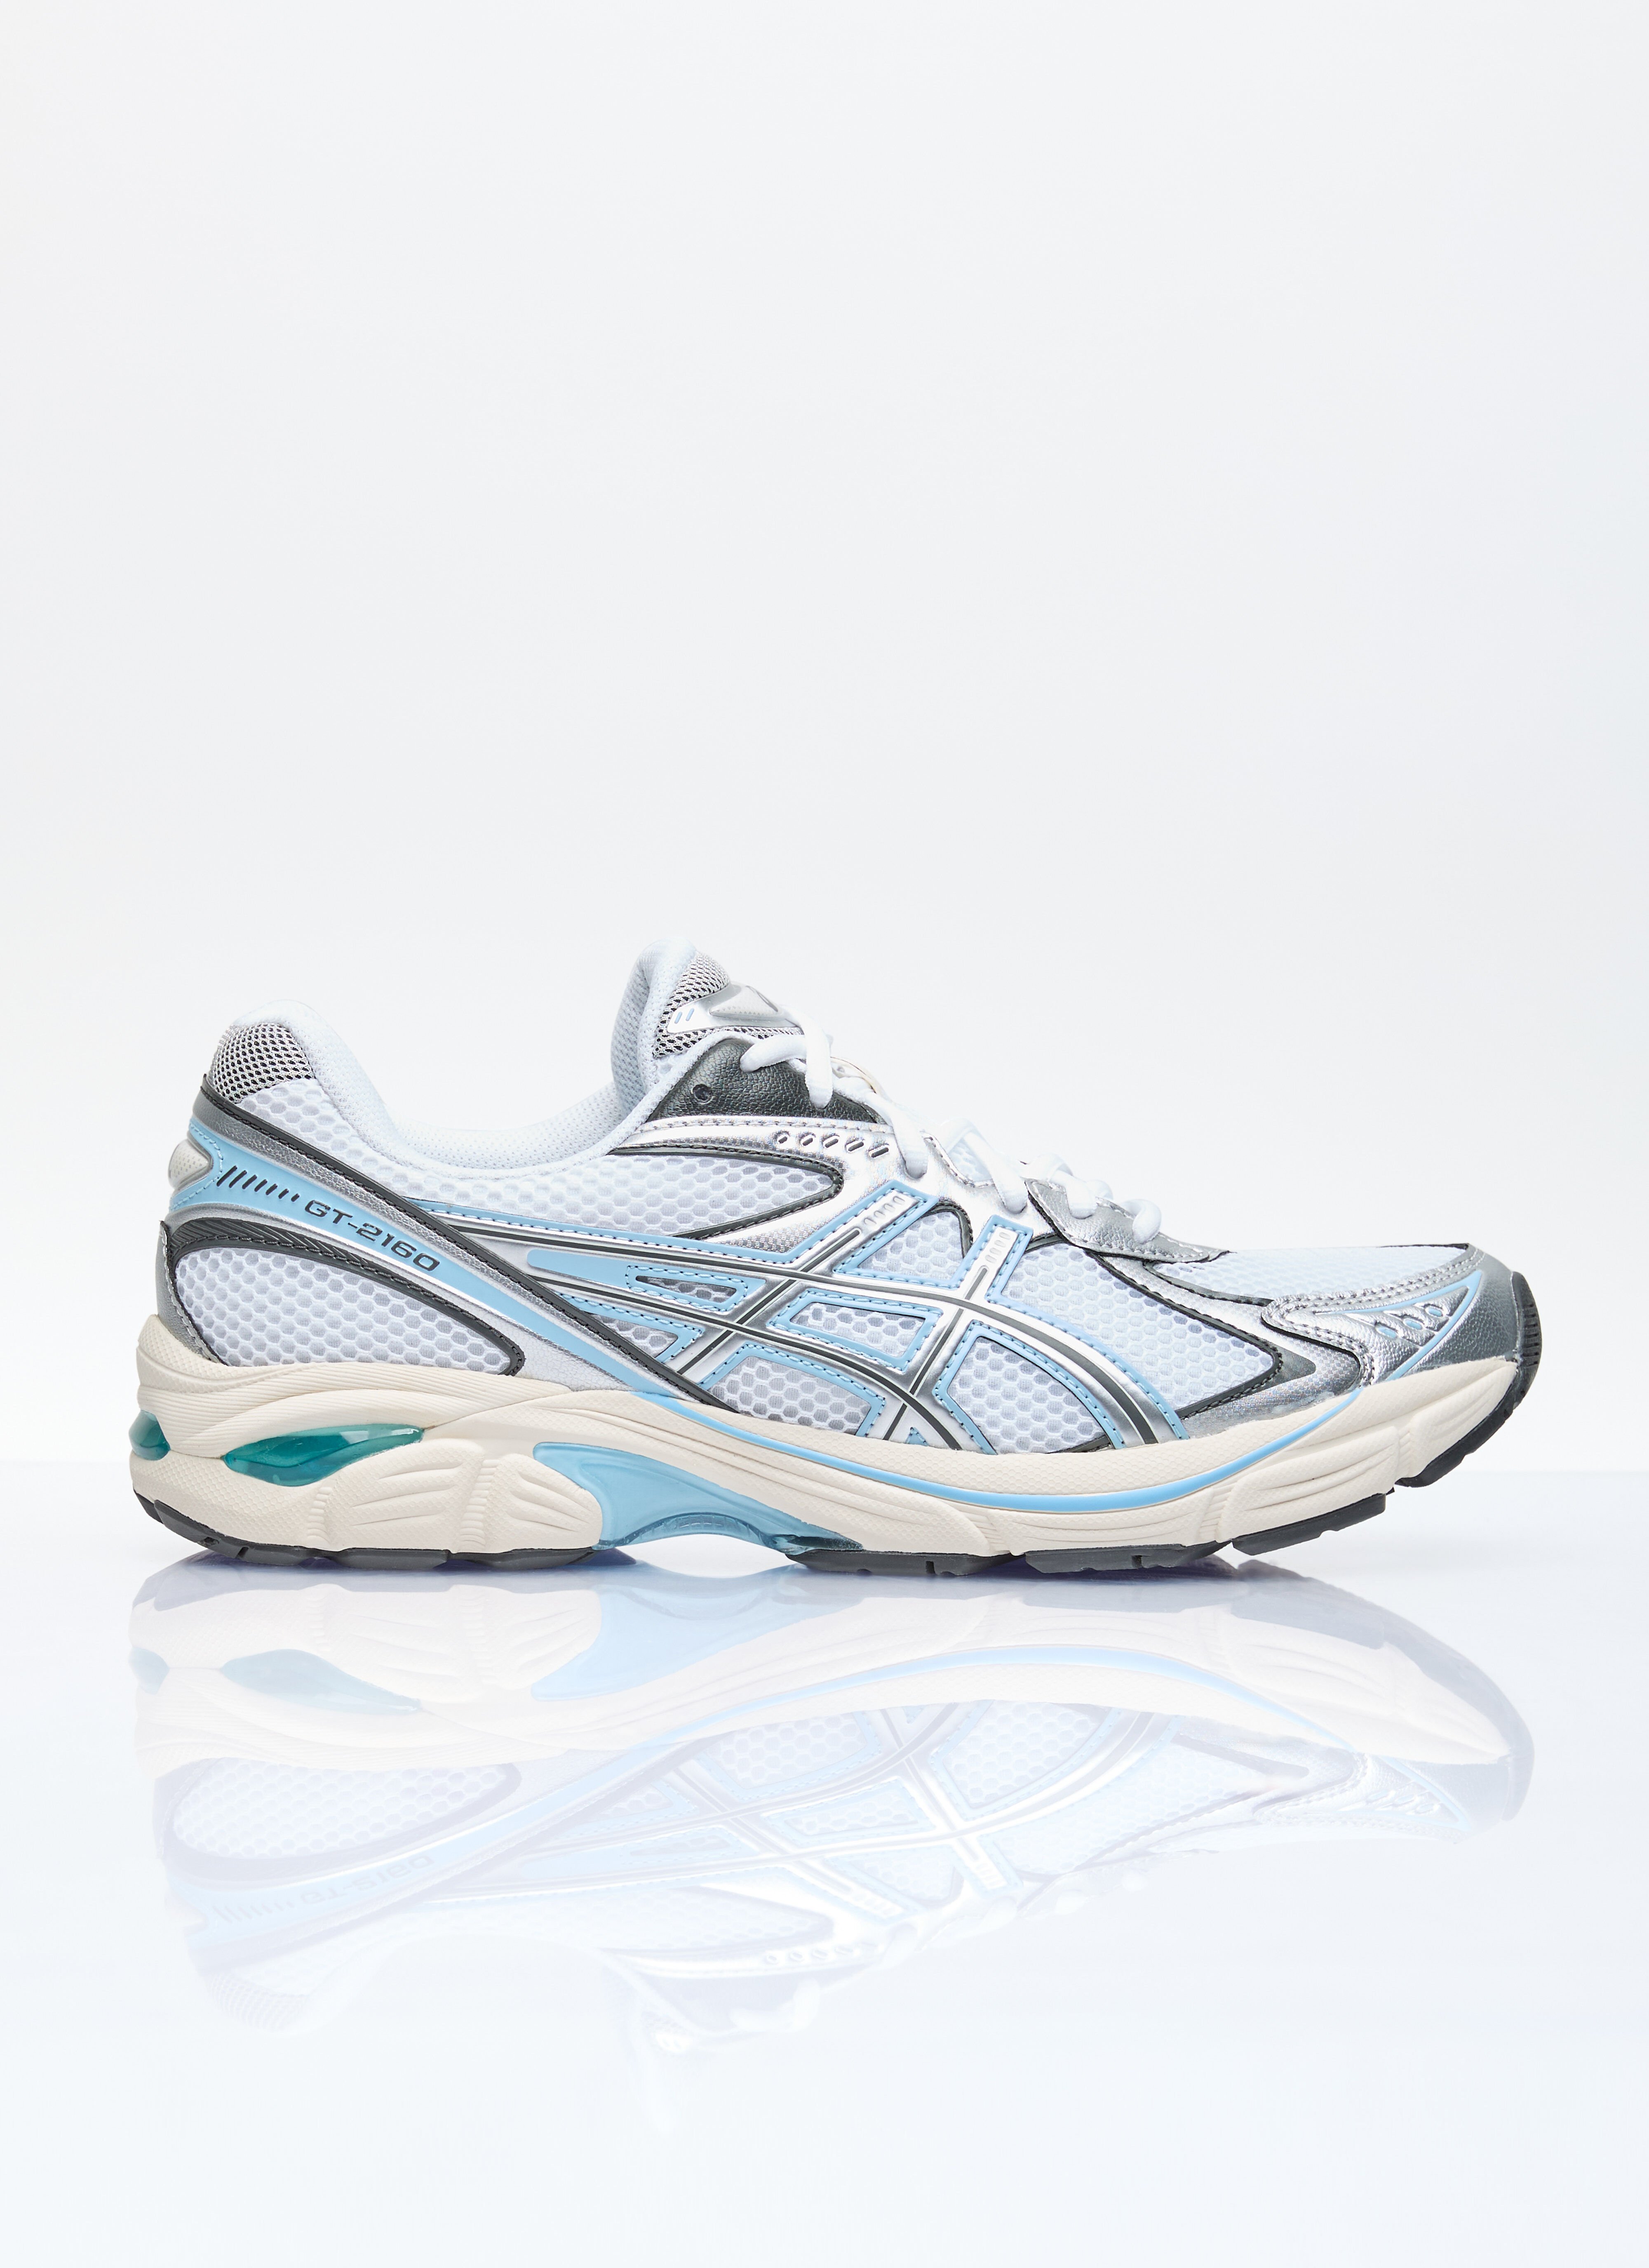 Asics x emmi GT-2160 Sneakers Silver axe0257001